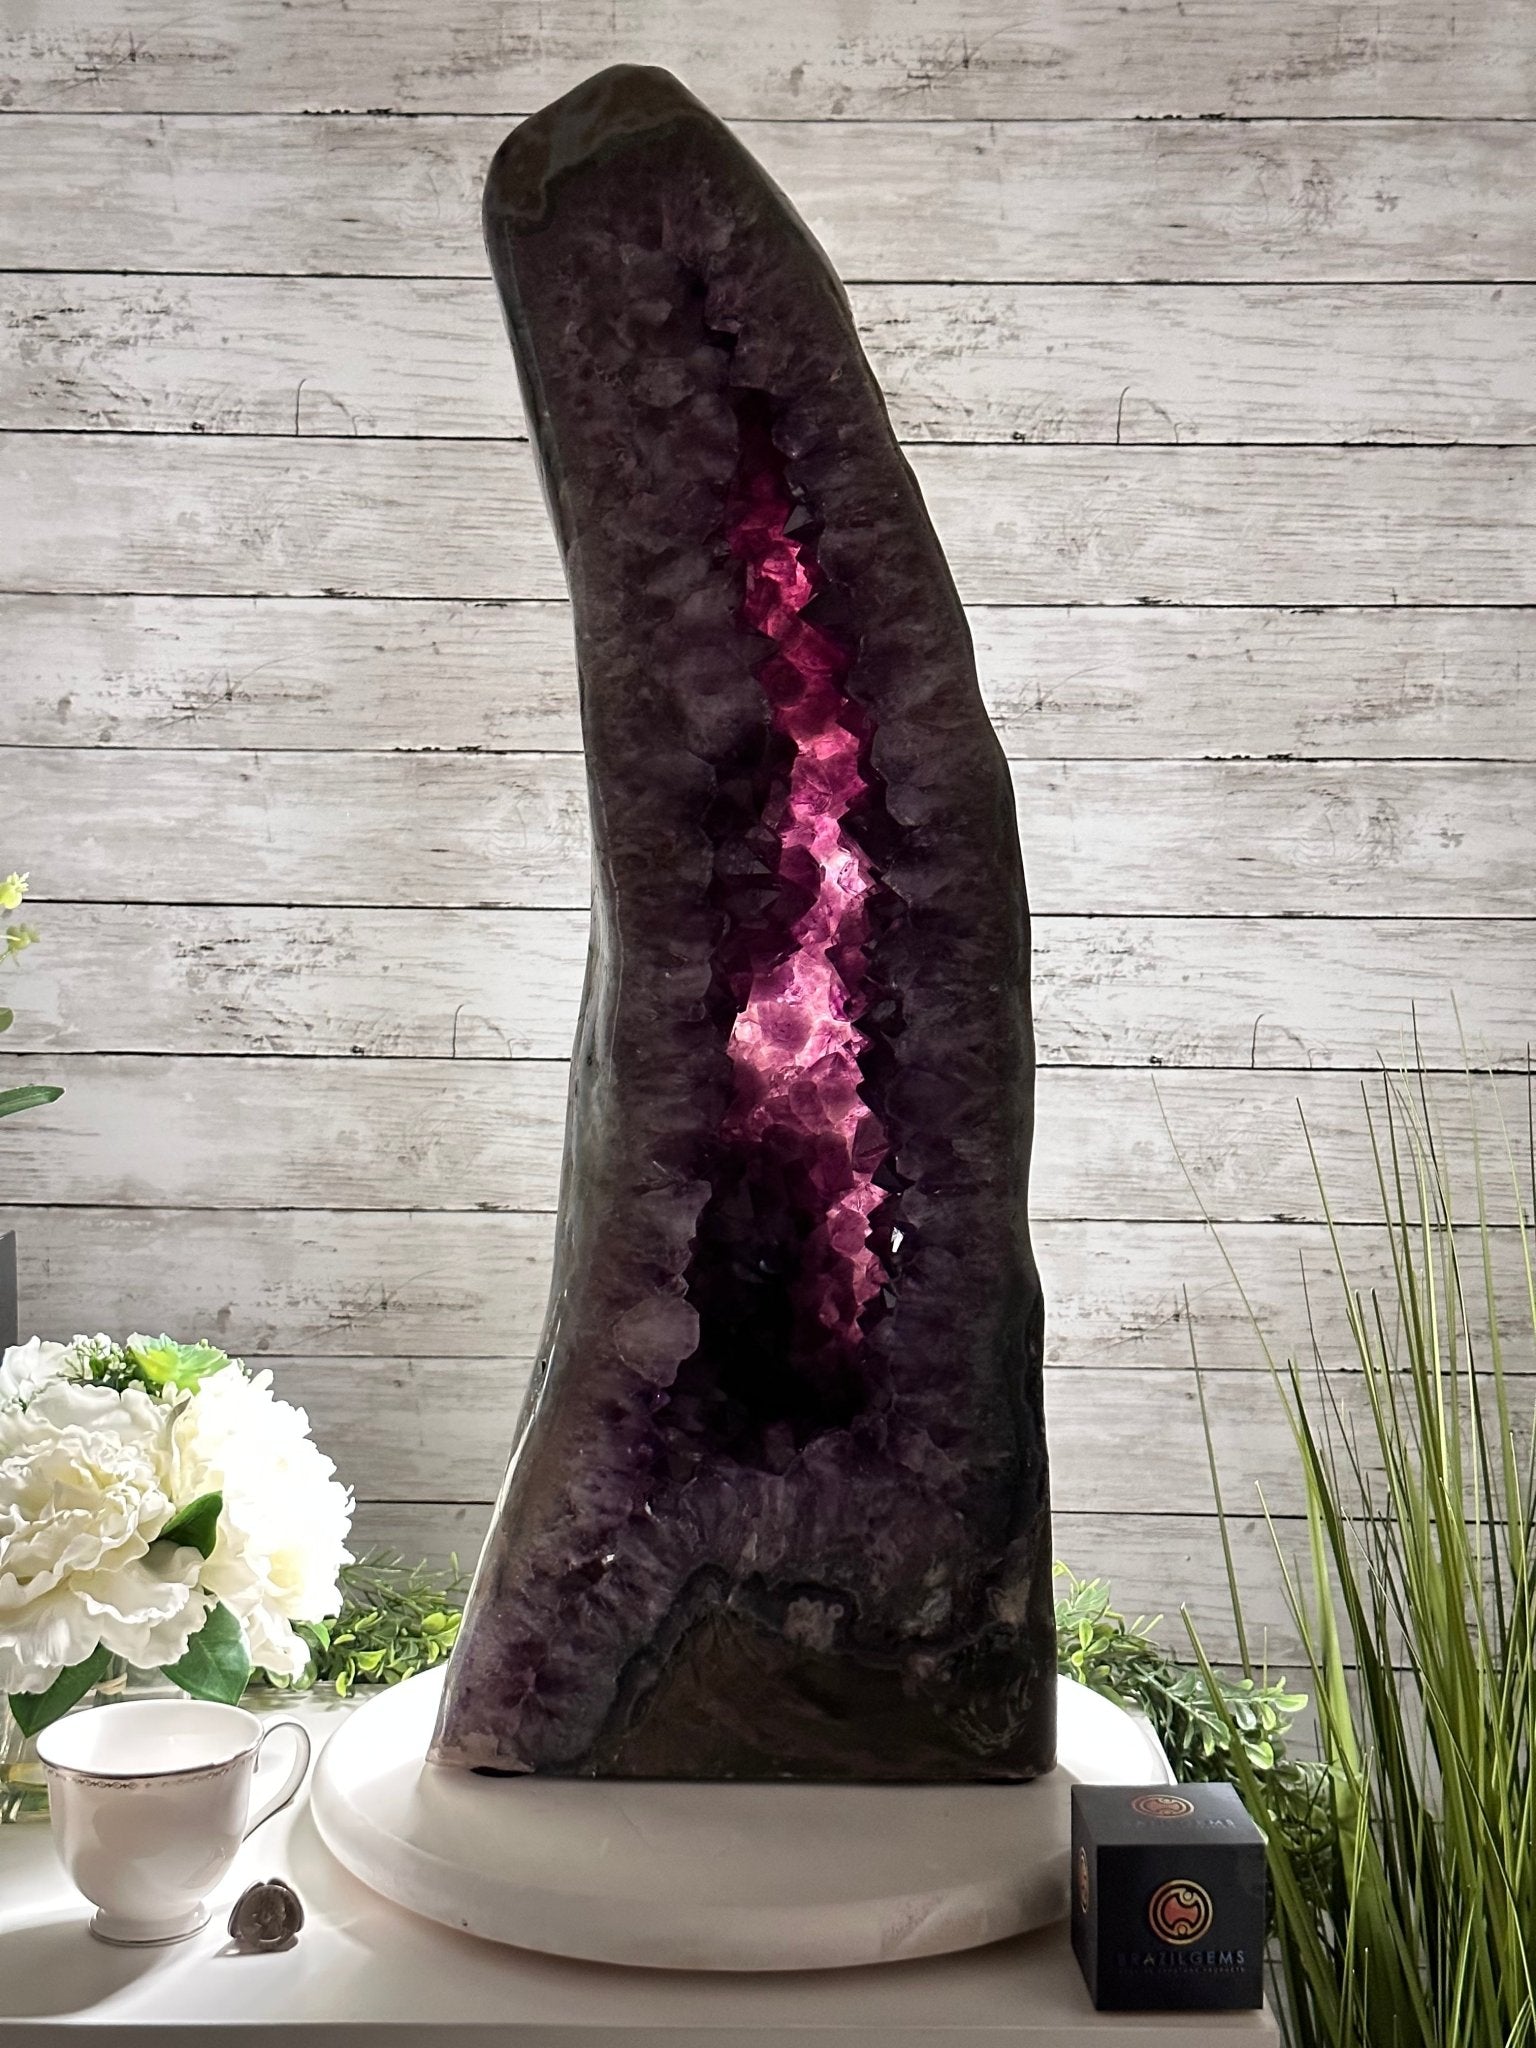 Extra Quality Polished Brazilian Amethyst Cathedral, 70.9 lbs & 28.7" tall Model #5602-0177 by Brazil Gems - Brazil GemsBrazil GemsExtra Quality Polished Brazilian Amethyst Cathedral, 70.9 lbs & 28.7" tall Model #5602-0177 by Brazil GemsPolished Cathedrals5602-0177